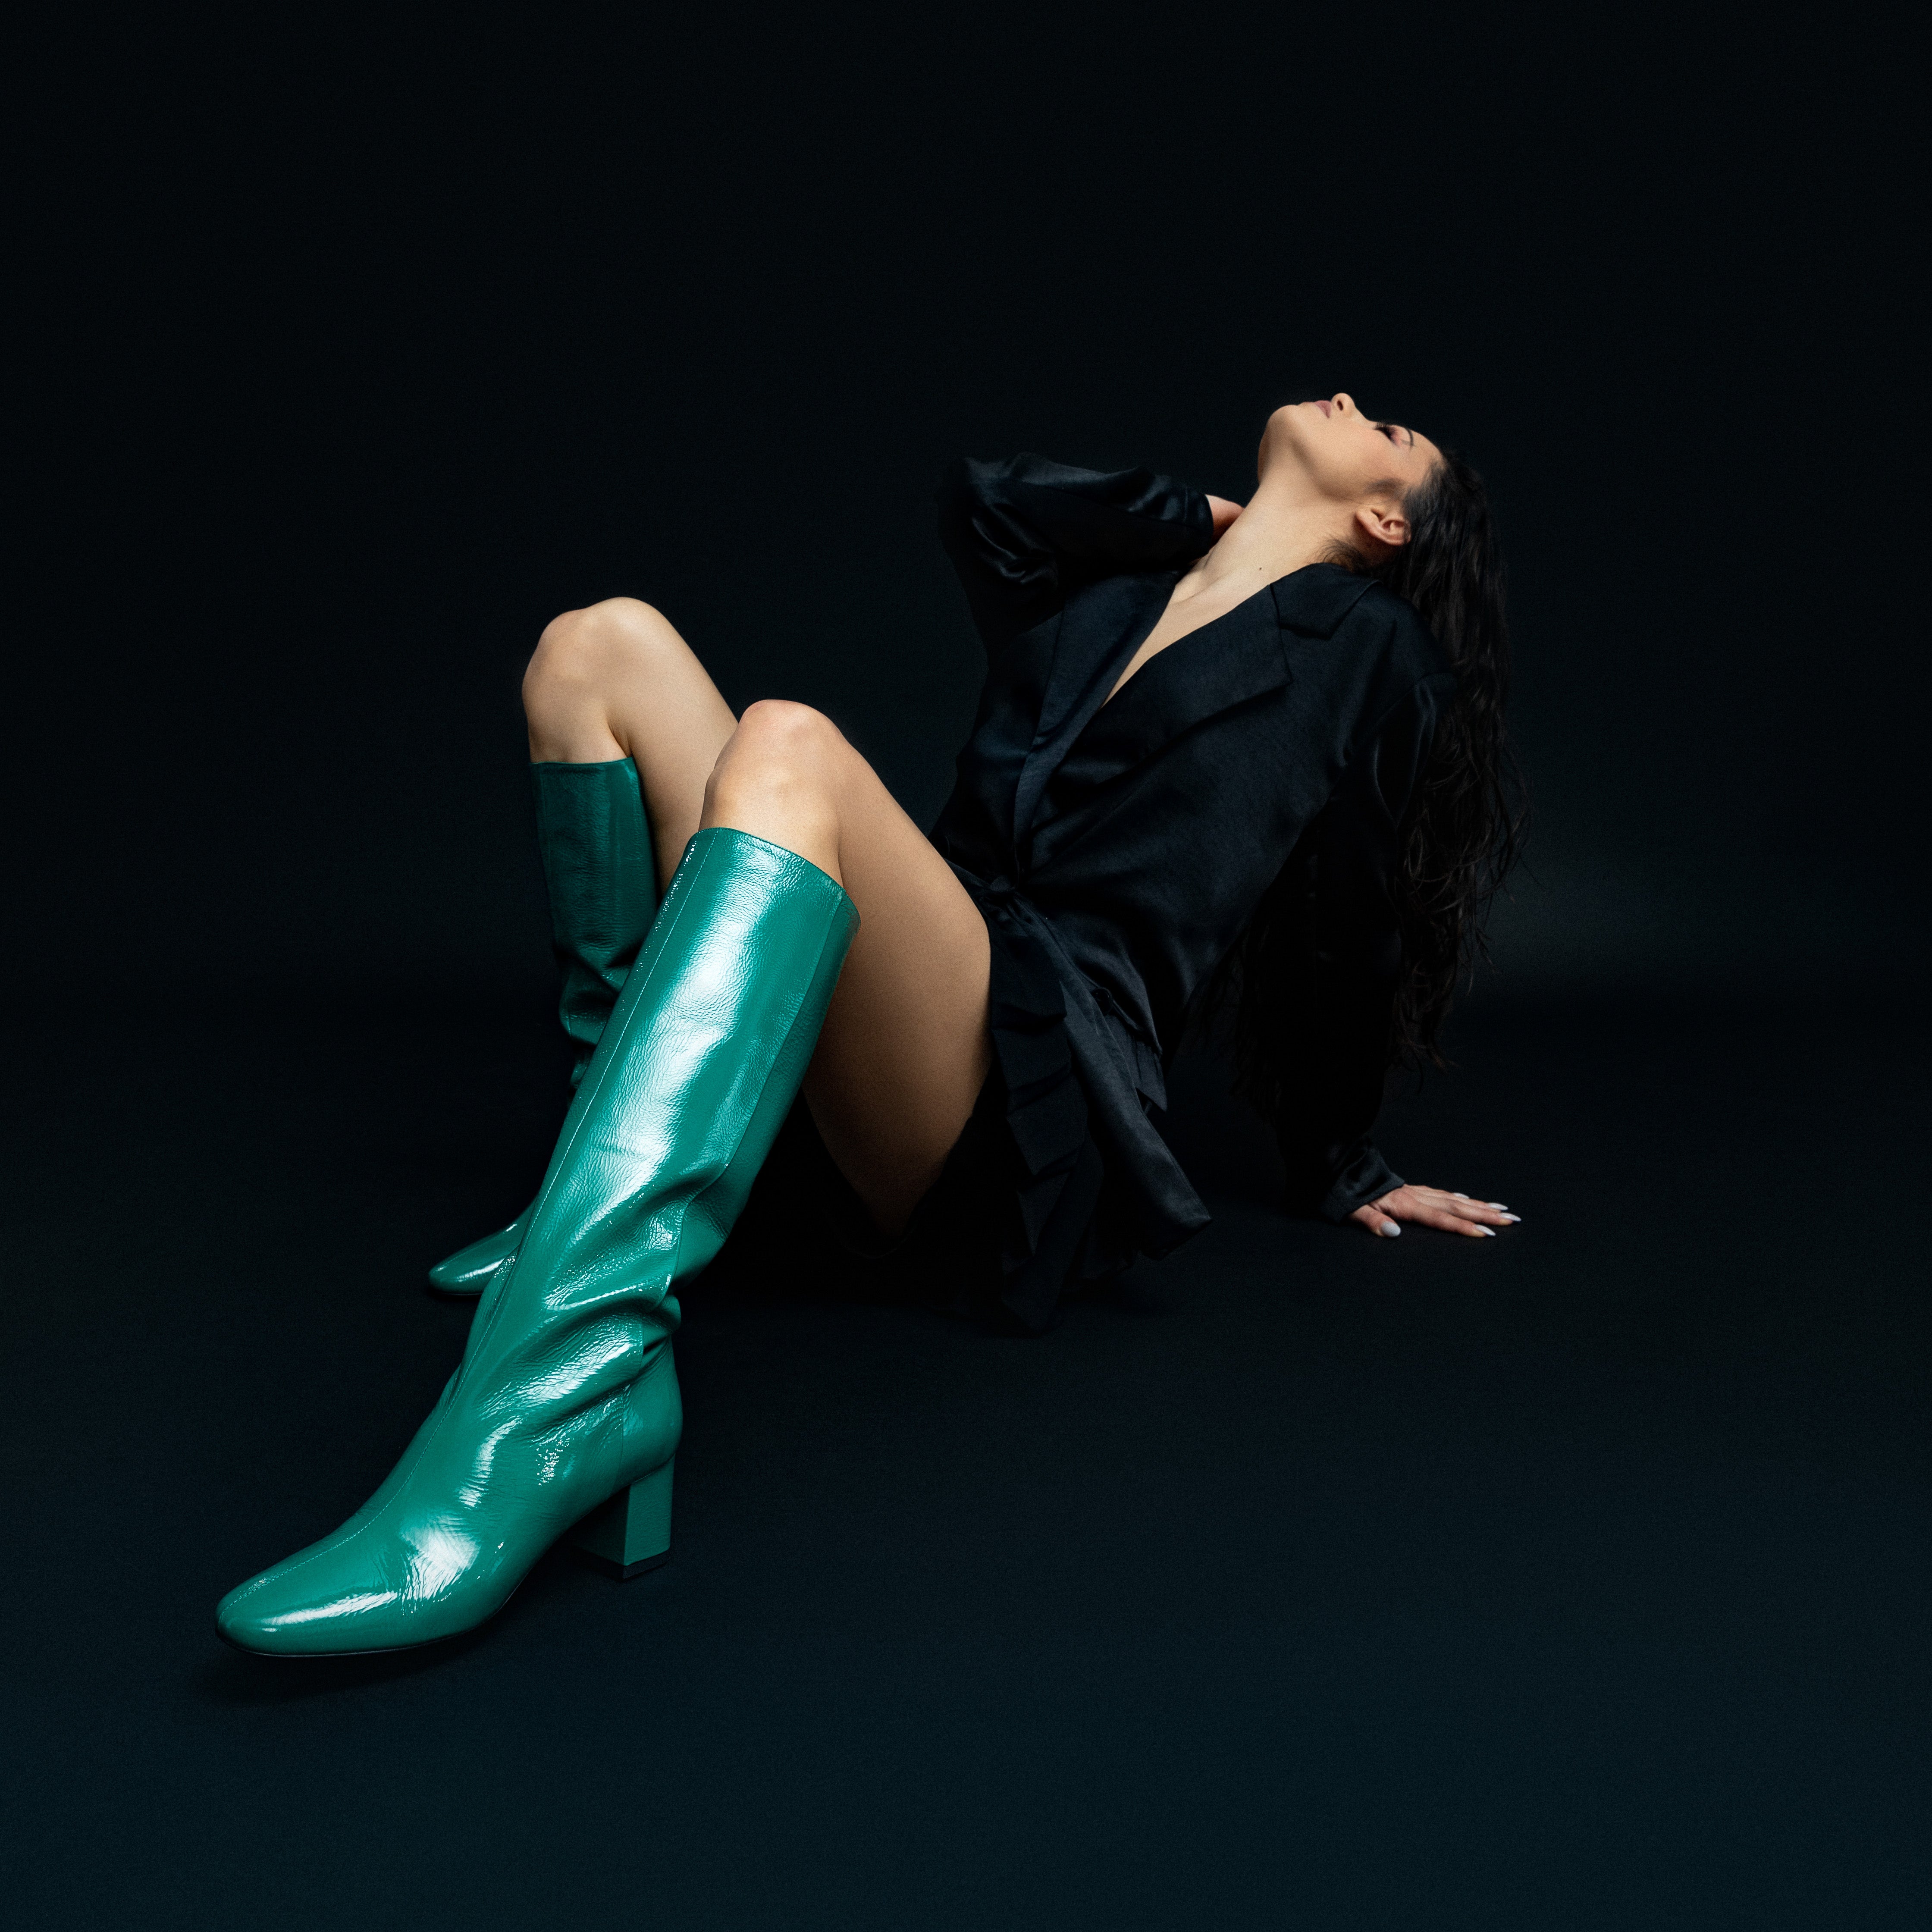 DEBBY TUBO 01 GREEN CRUSHED PATENT LEATHER BOOTS